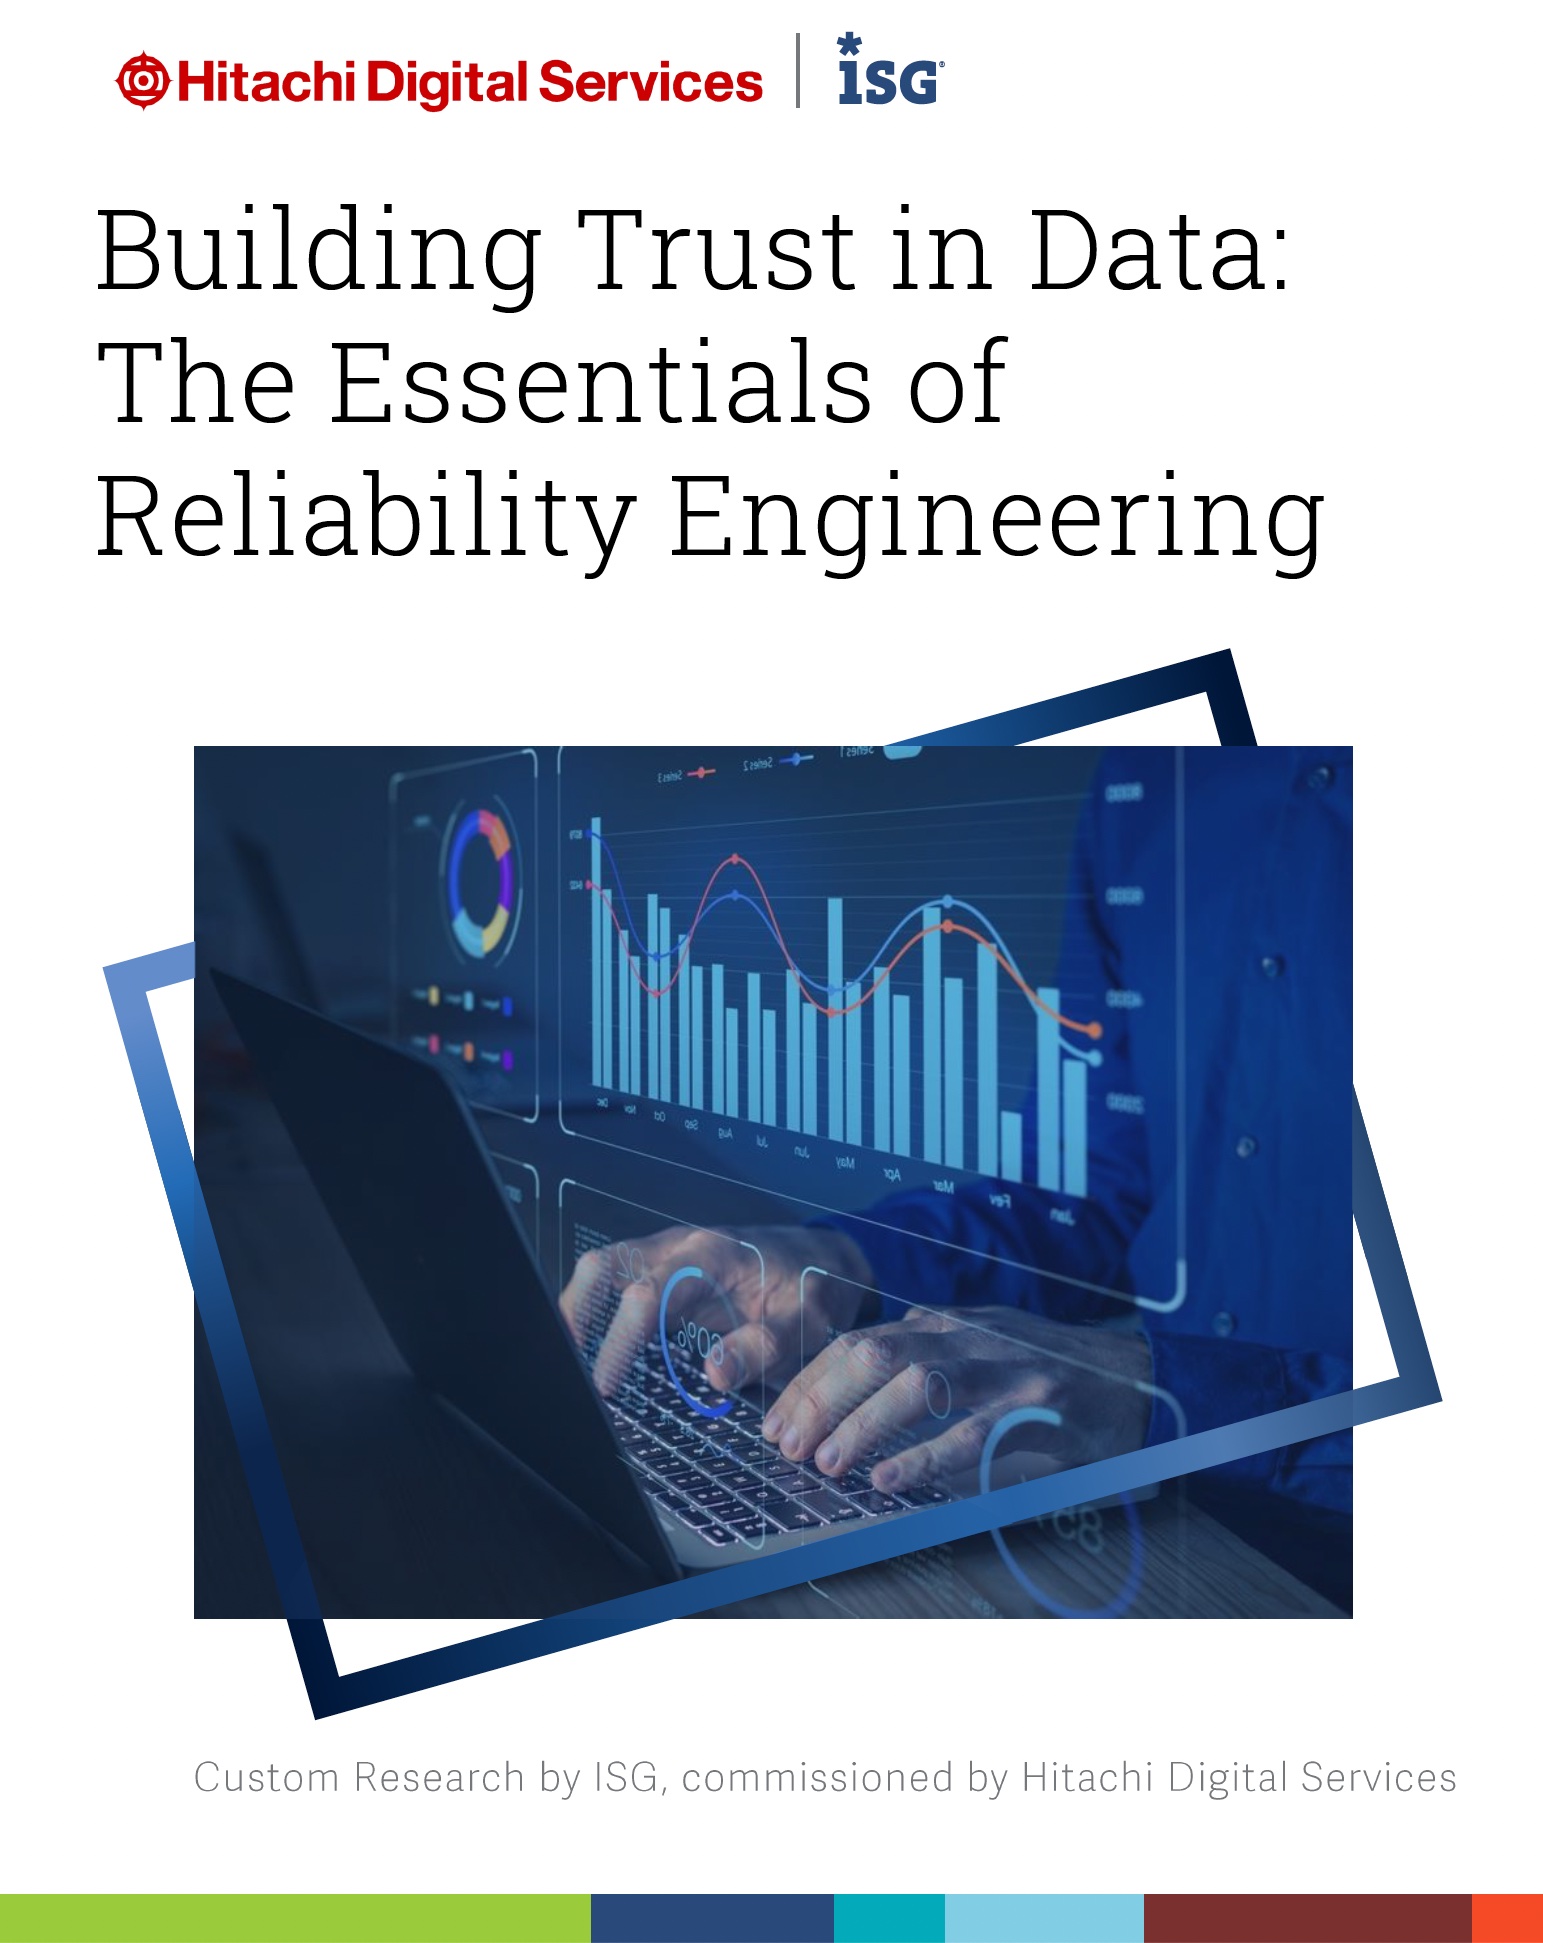 Building Trust in Data: The Essentials of Reliability Engineering